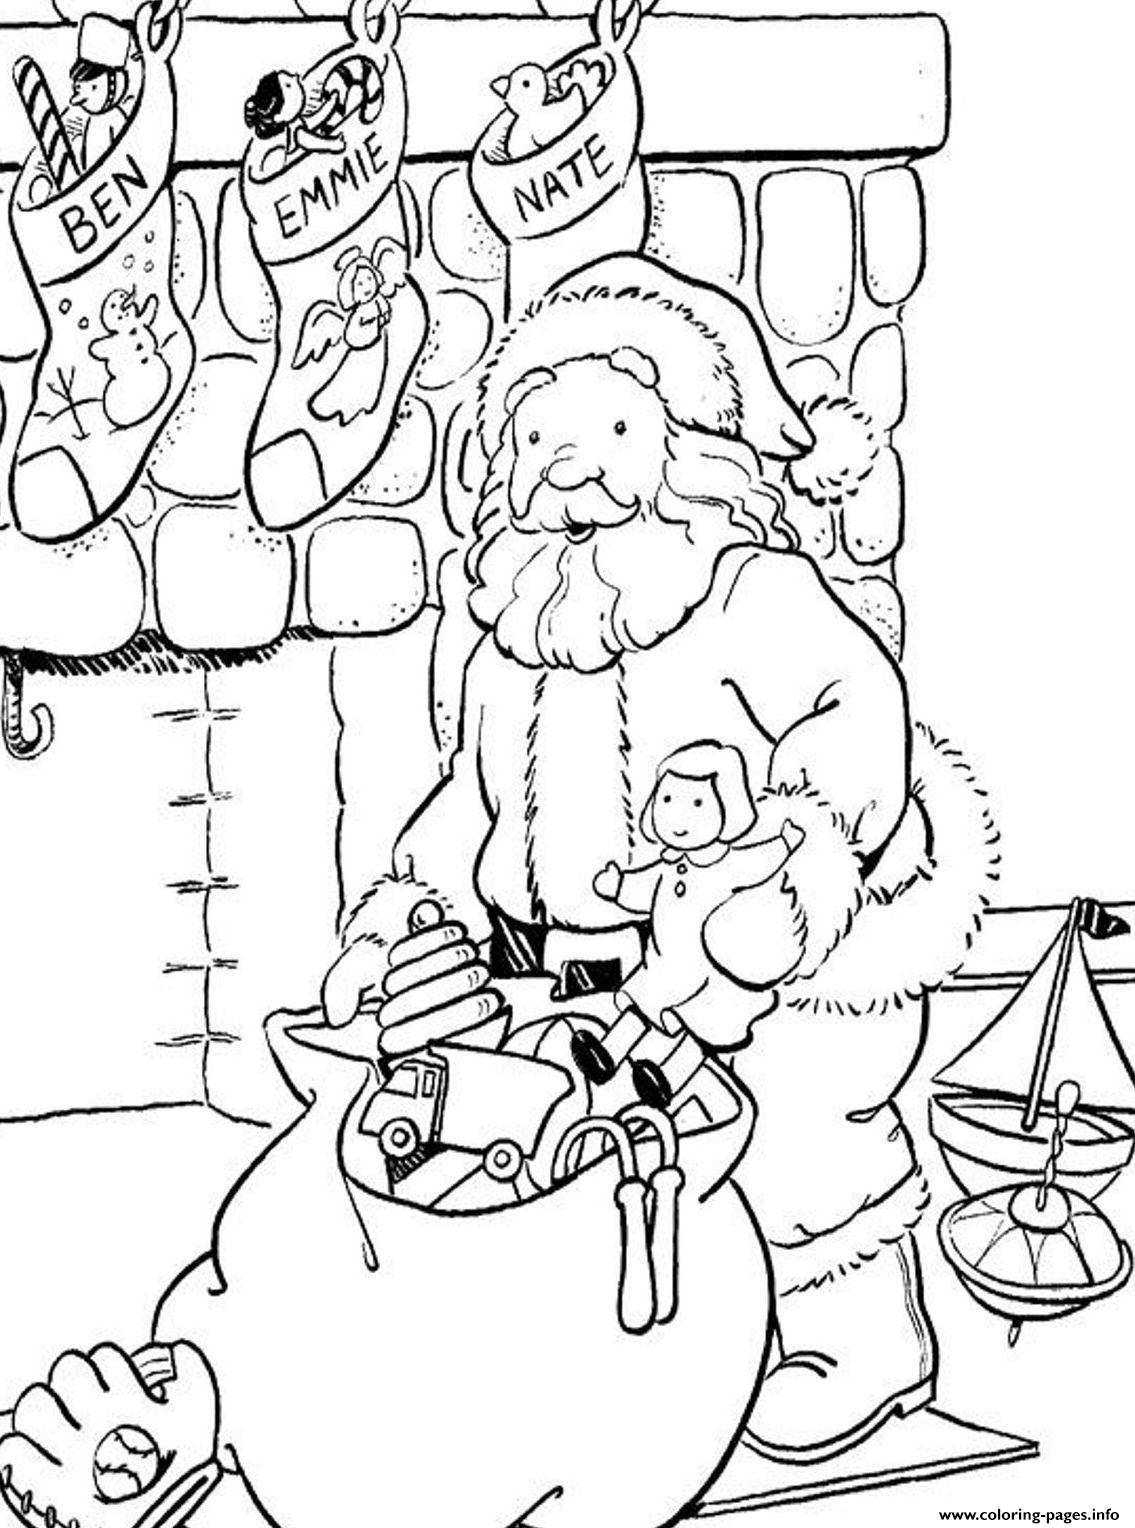 Fireplace And Stocking Santa S For Kids Printable3635 coloring